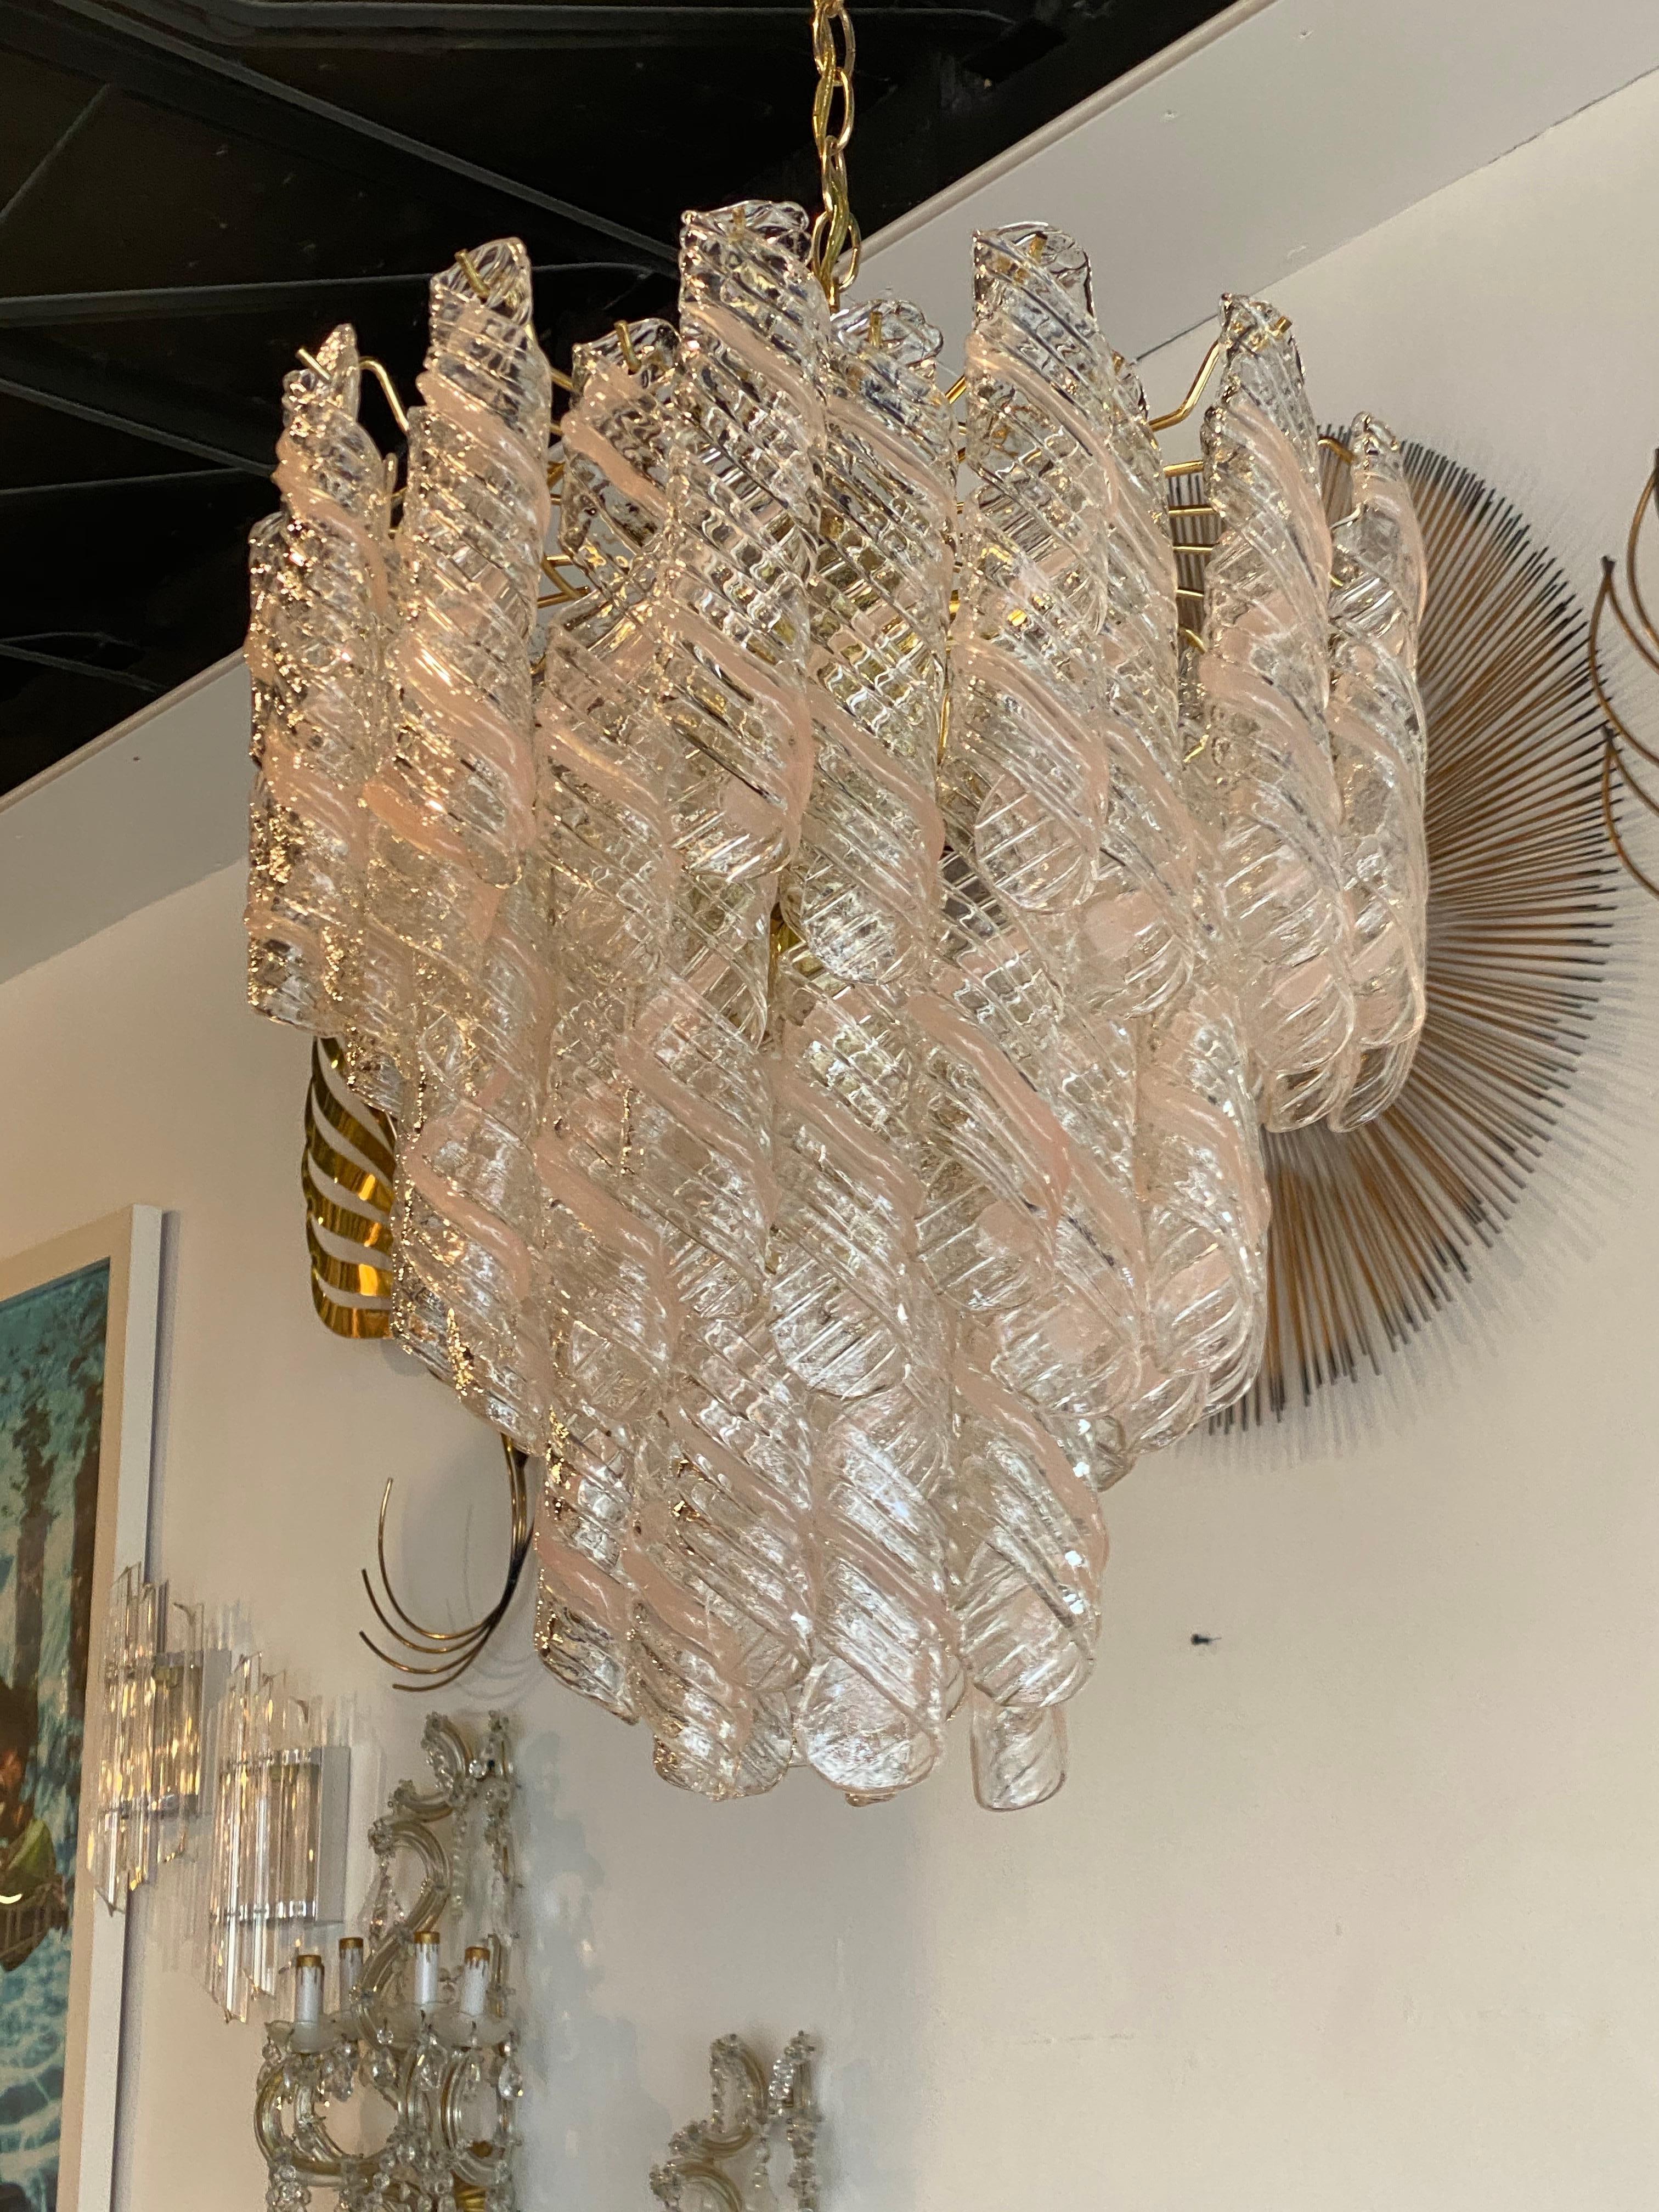 Lovely vintage Murano Mazzega Torciglione pink and clear glass swirl chandelier, 3 tiers, 8 lights. No chips or breaks to any of the glass pieces. Comes with brass ceiling CAP. Also listing matching 2-tier chandelier.